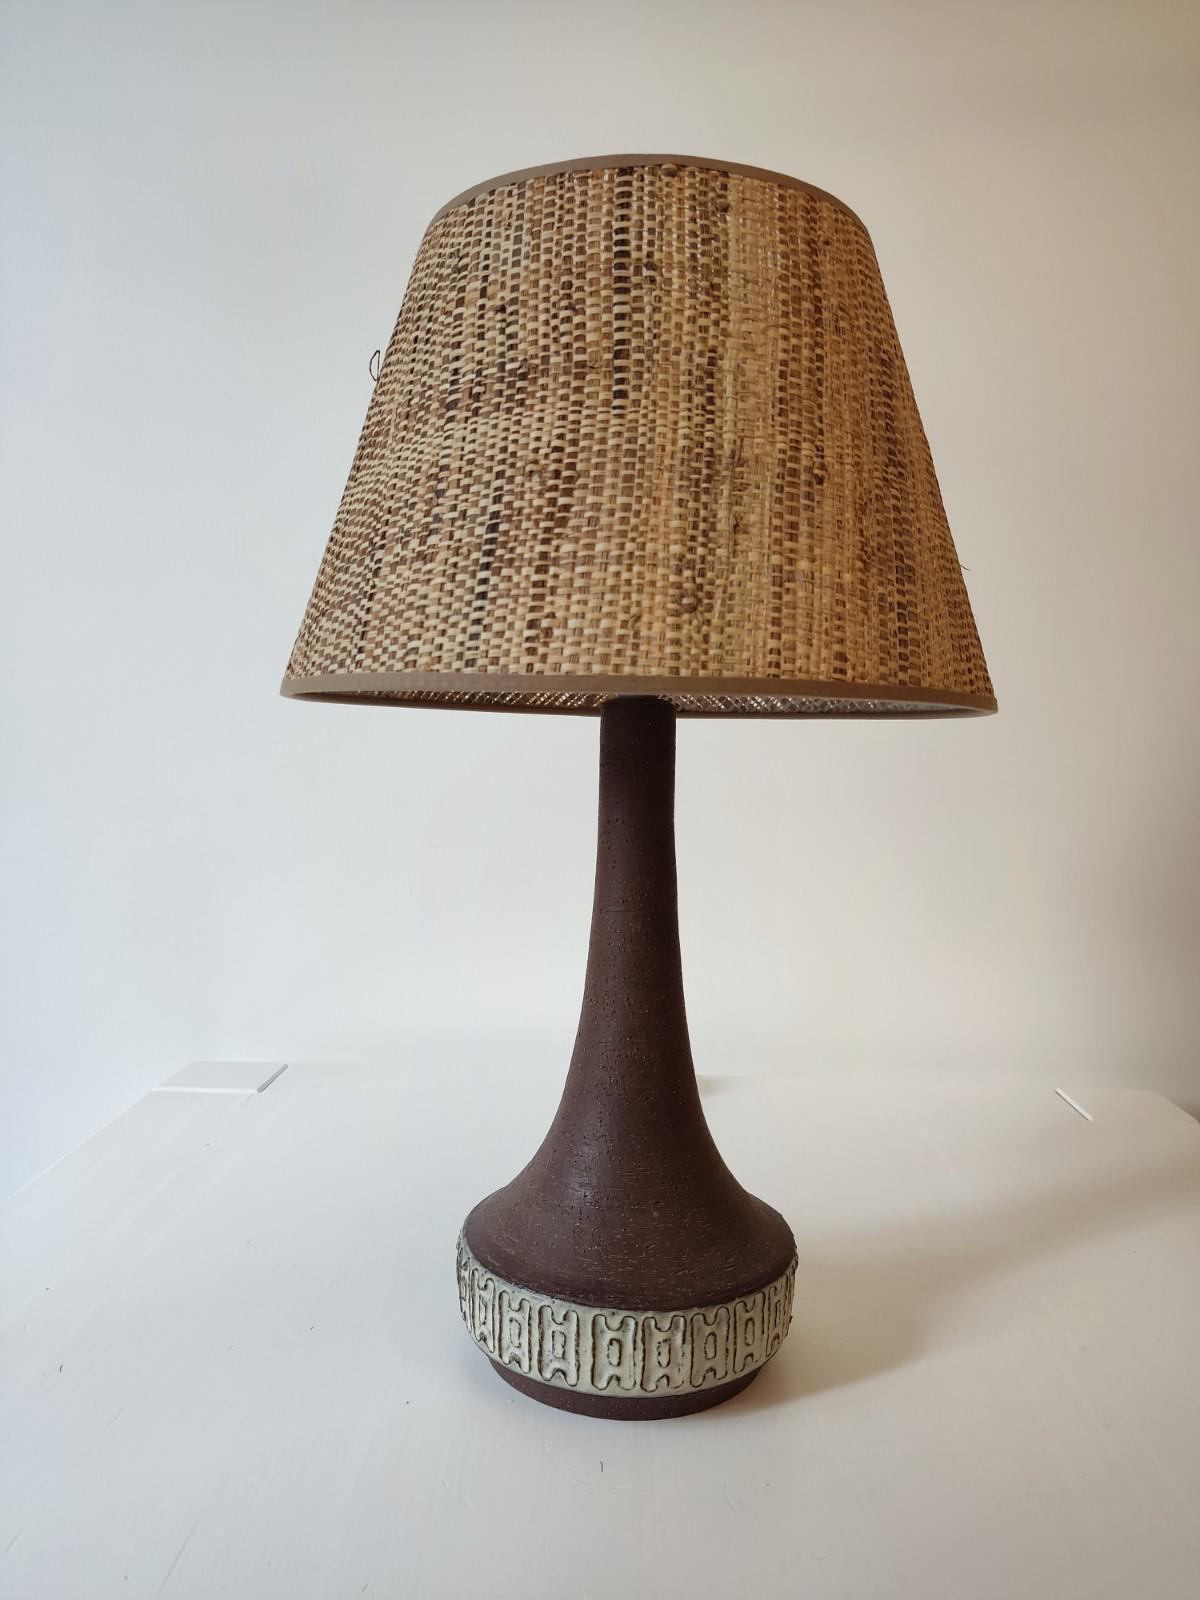 Rare Danish table lamp Michael Andersen by Helge Bjufstrom, 1960s
the natural raffia lampshade is new as well as the electricity.
Nice warm light.
Numbered under the foot.

